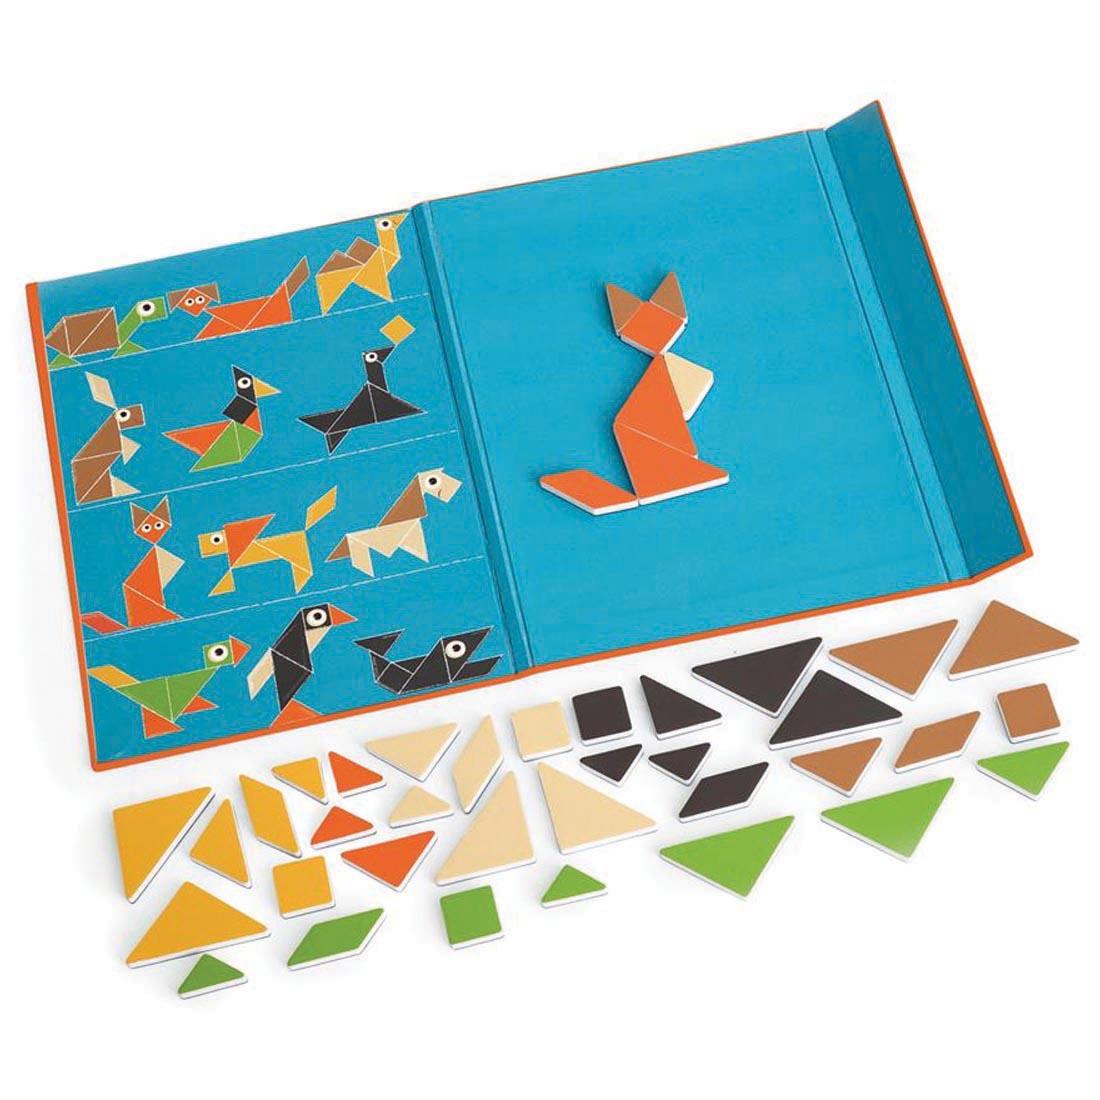 pieces and board from Magnetic Tangram Animals By EduLogic